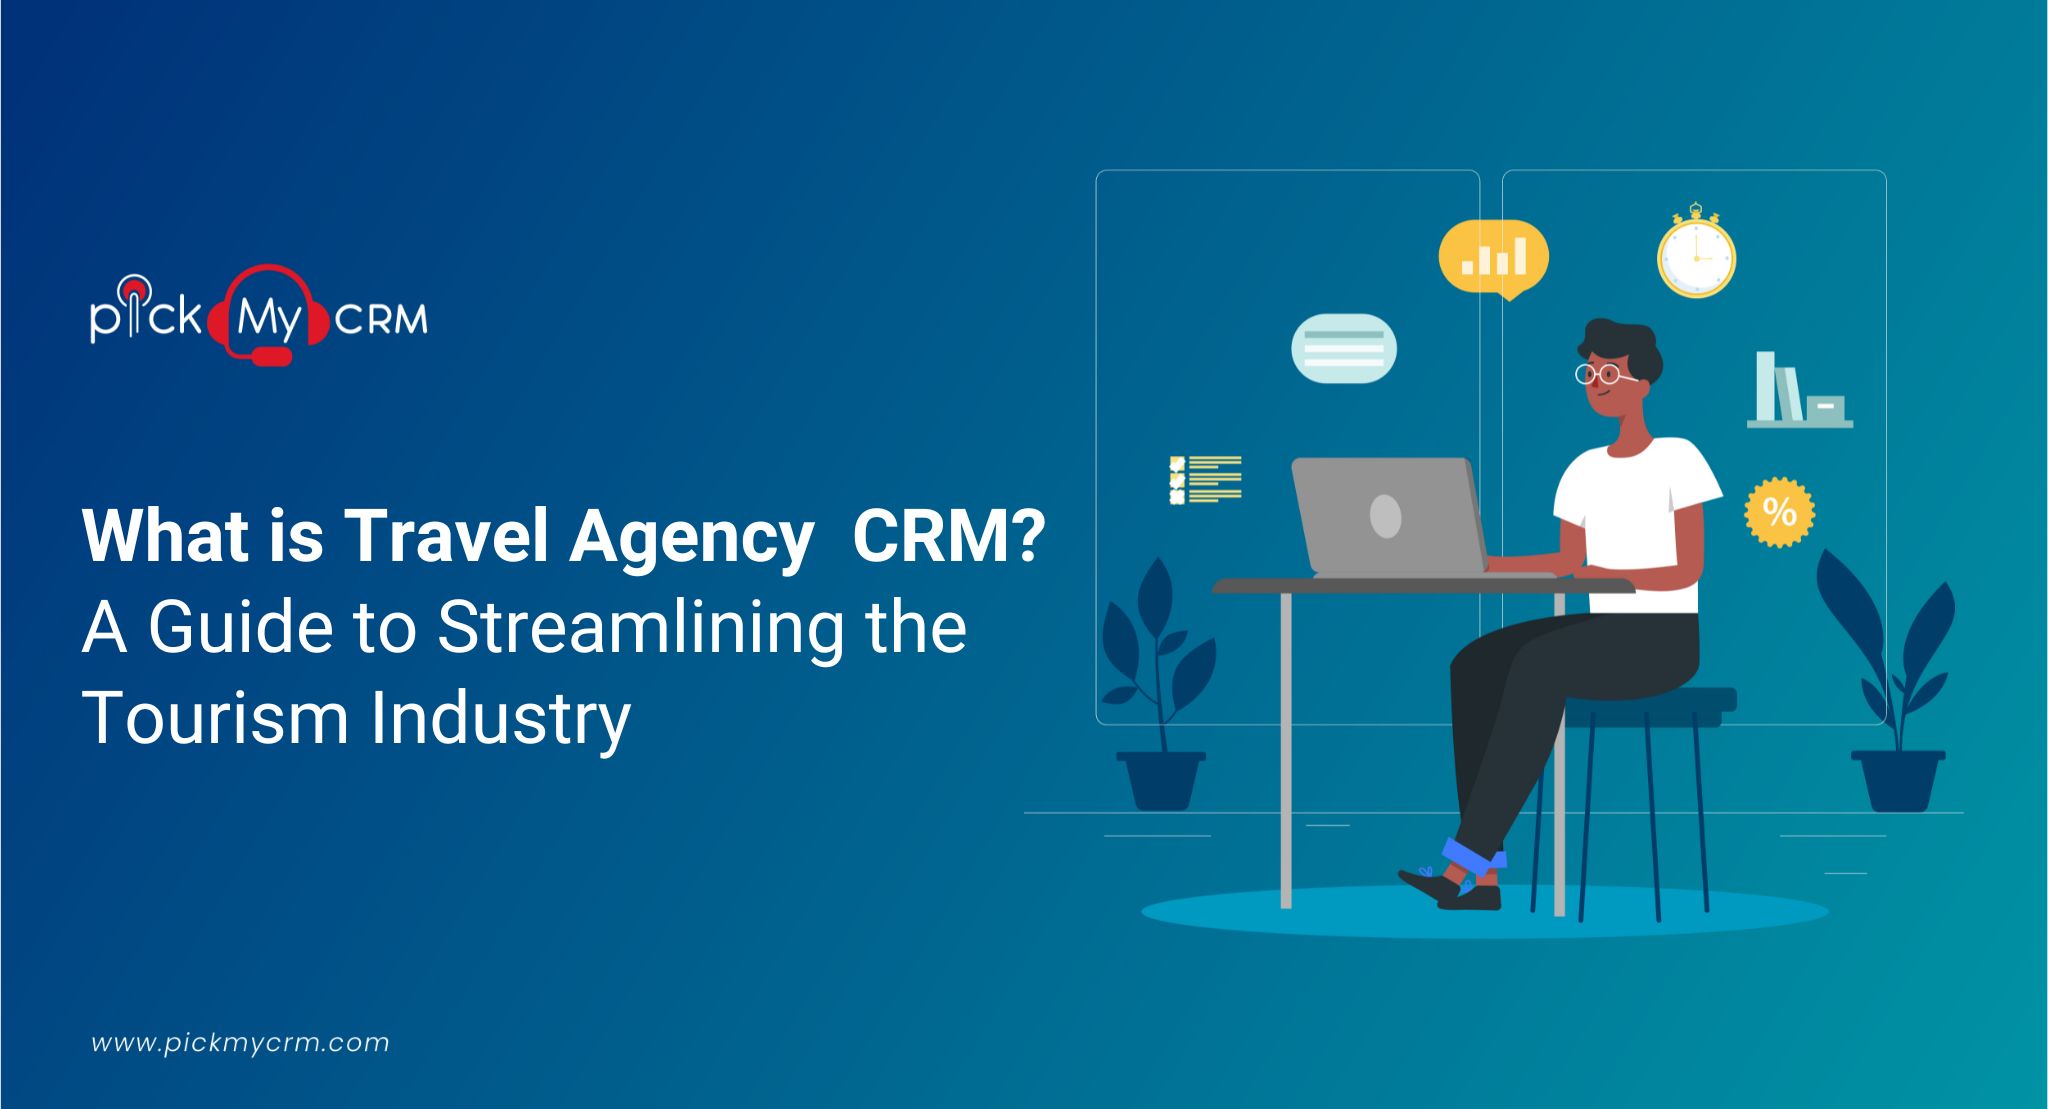 What is Travel Agency CRM? A Guide to Streamlining the Tourism Industry